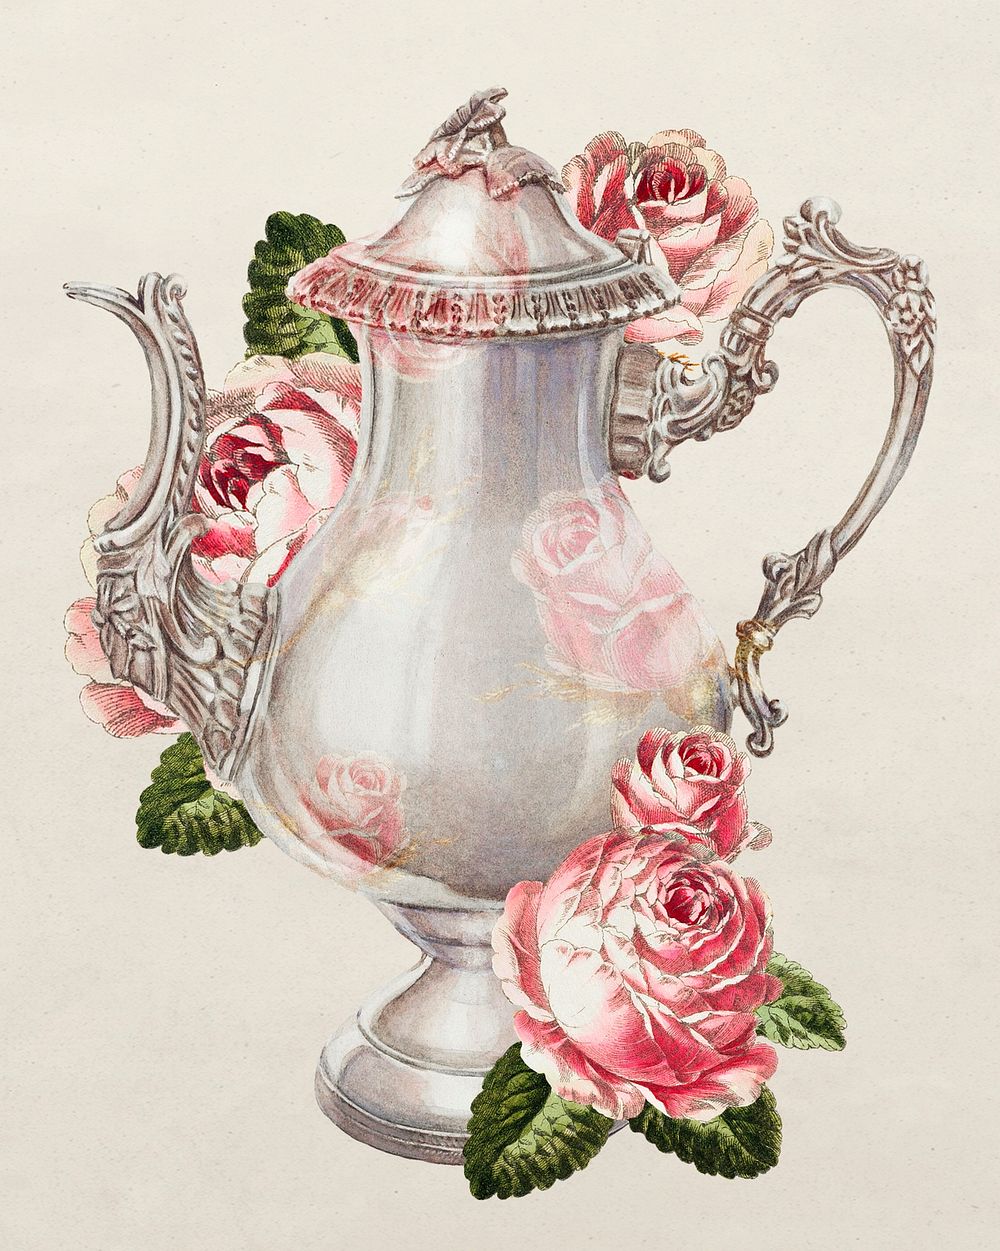 Vintage coffee pot psd with flower illustration, remixed from the artwork by Ernest A. Towers, Jr.